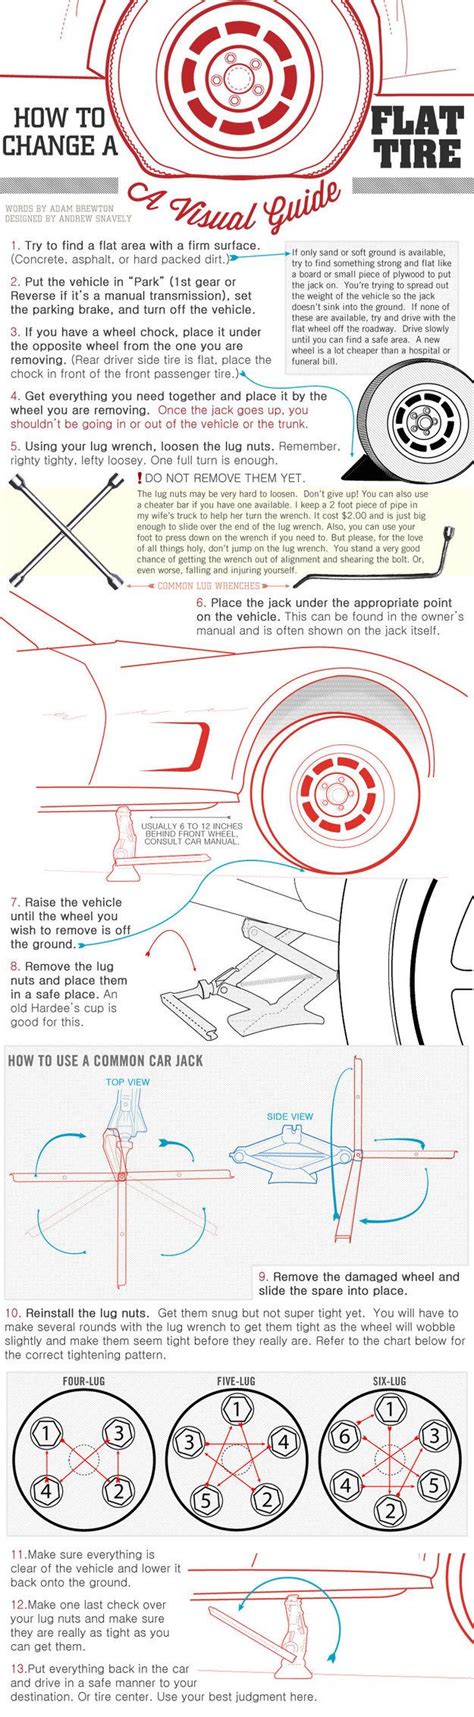 21 Genius Car Cheat Sheets Every Driver Needs To See Car Essentials